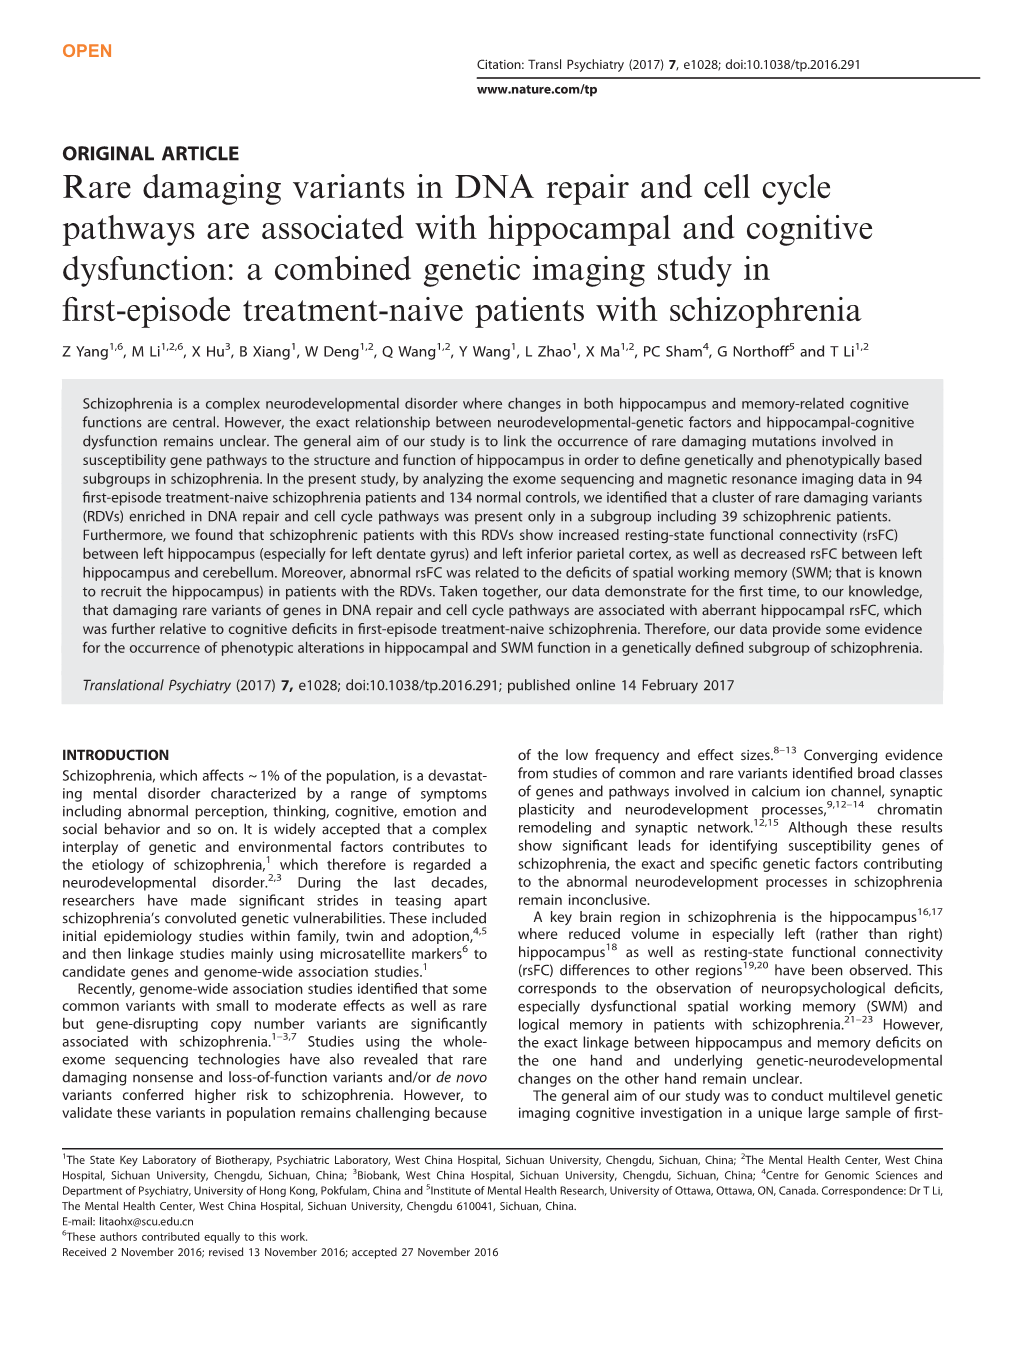 Rare Damaging Variants in DNA Repair and Cell Cycle Pathways